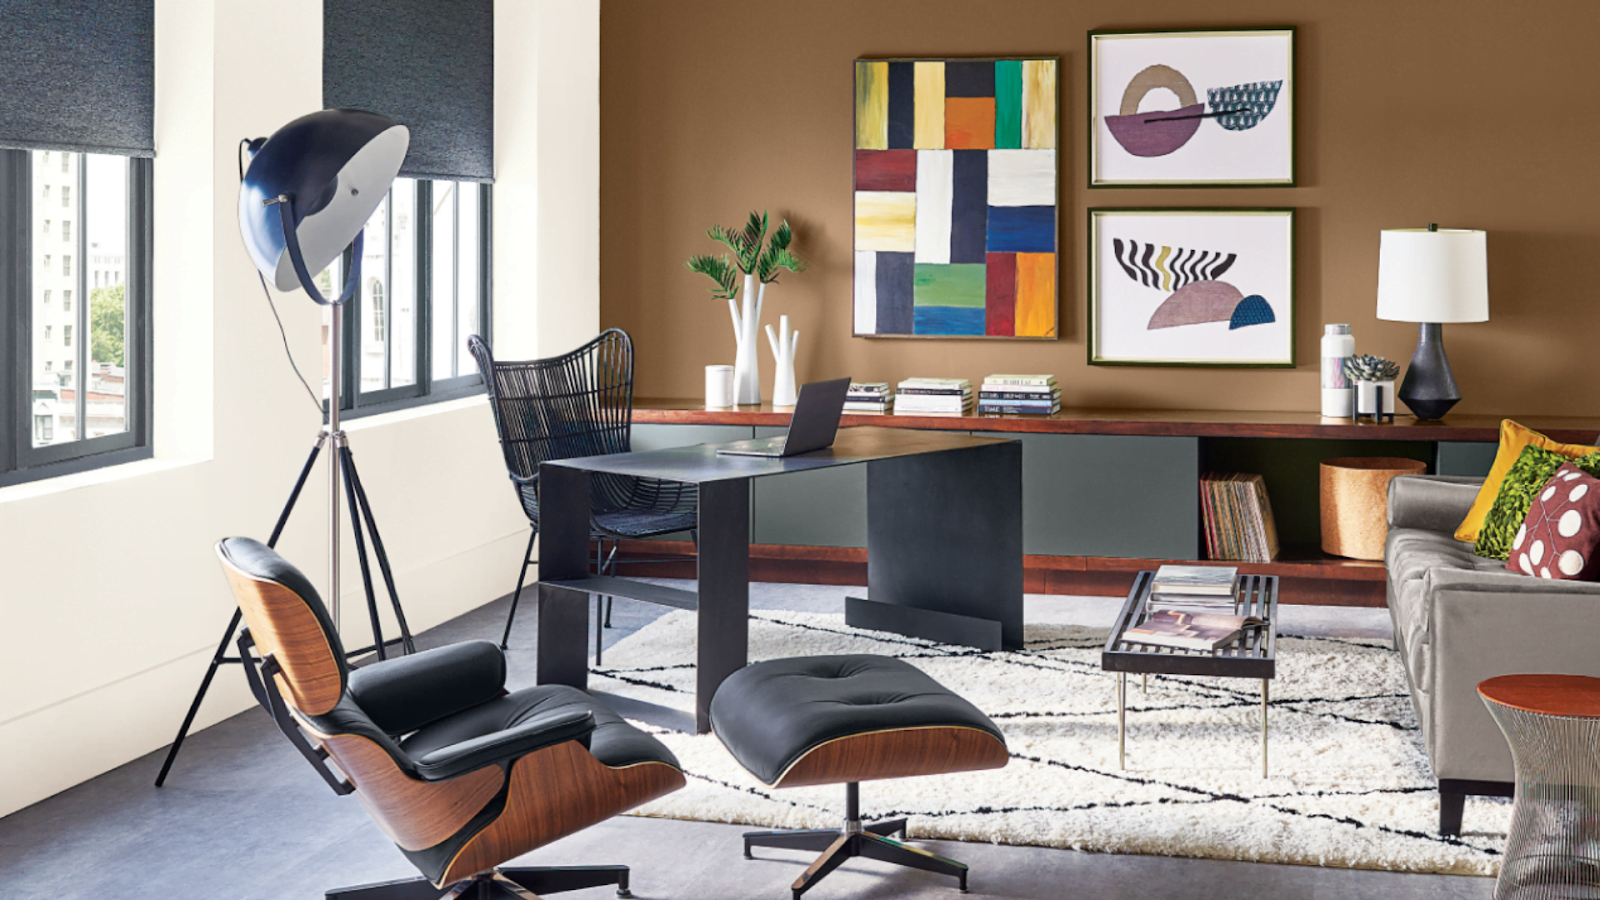 How to Choose the Best Paint Color for Your Office